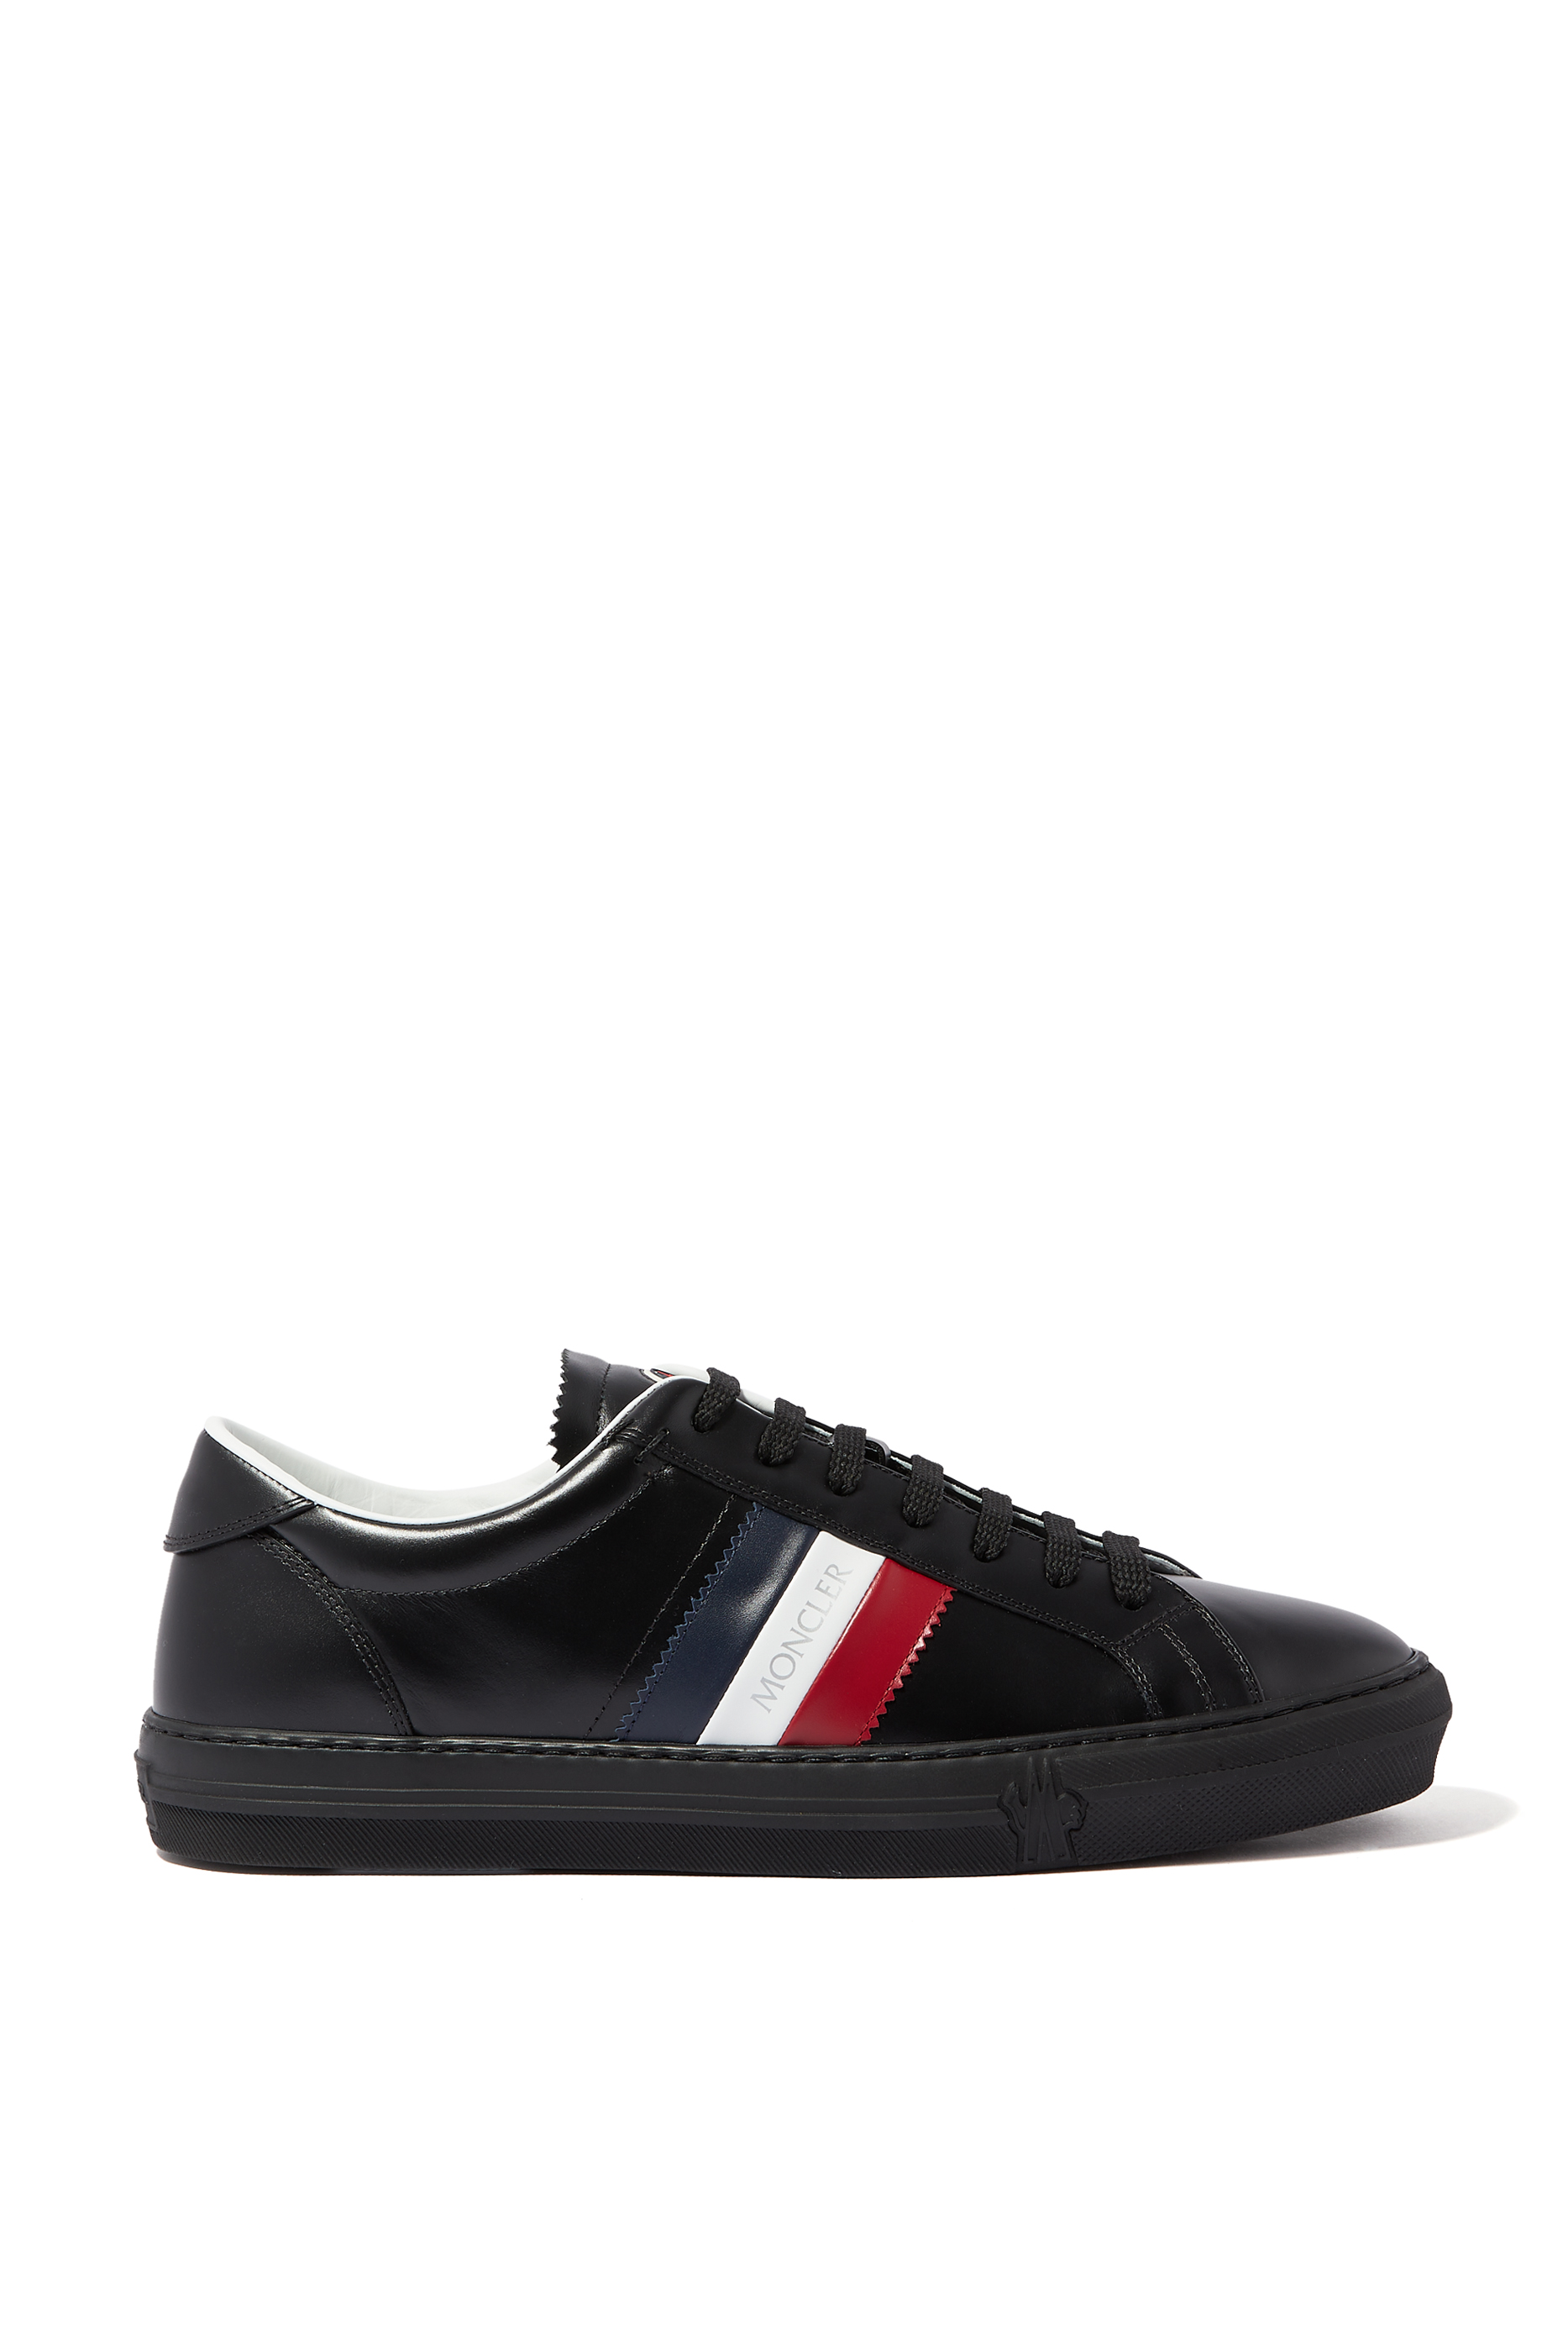 Buy Moncler New Monaco Leather Sneakers - Mens for AED 1750.00 Sneakers ...